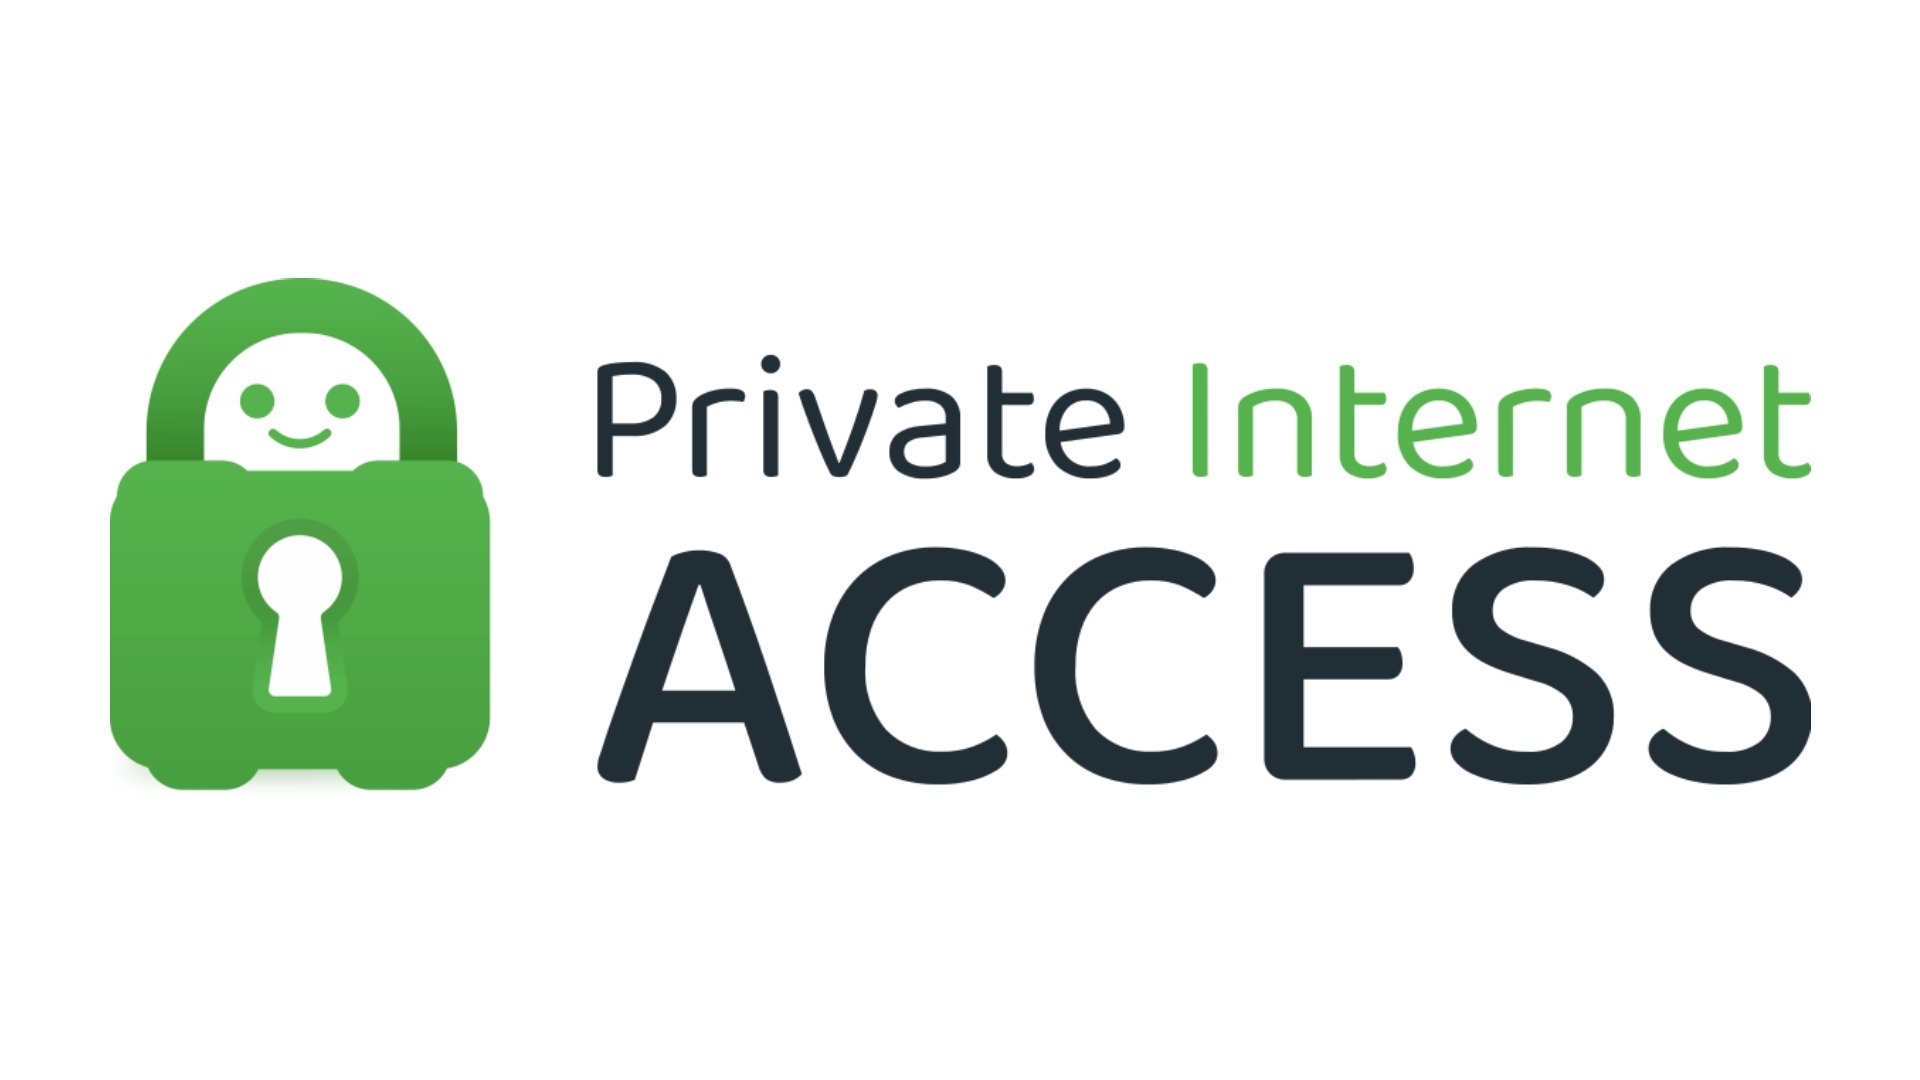 Best Japan VPN - Private Internet Access, Image shows the company logo.